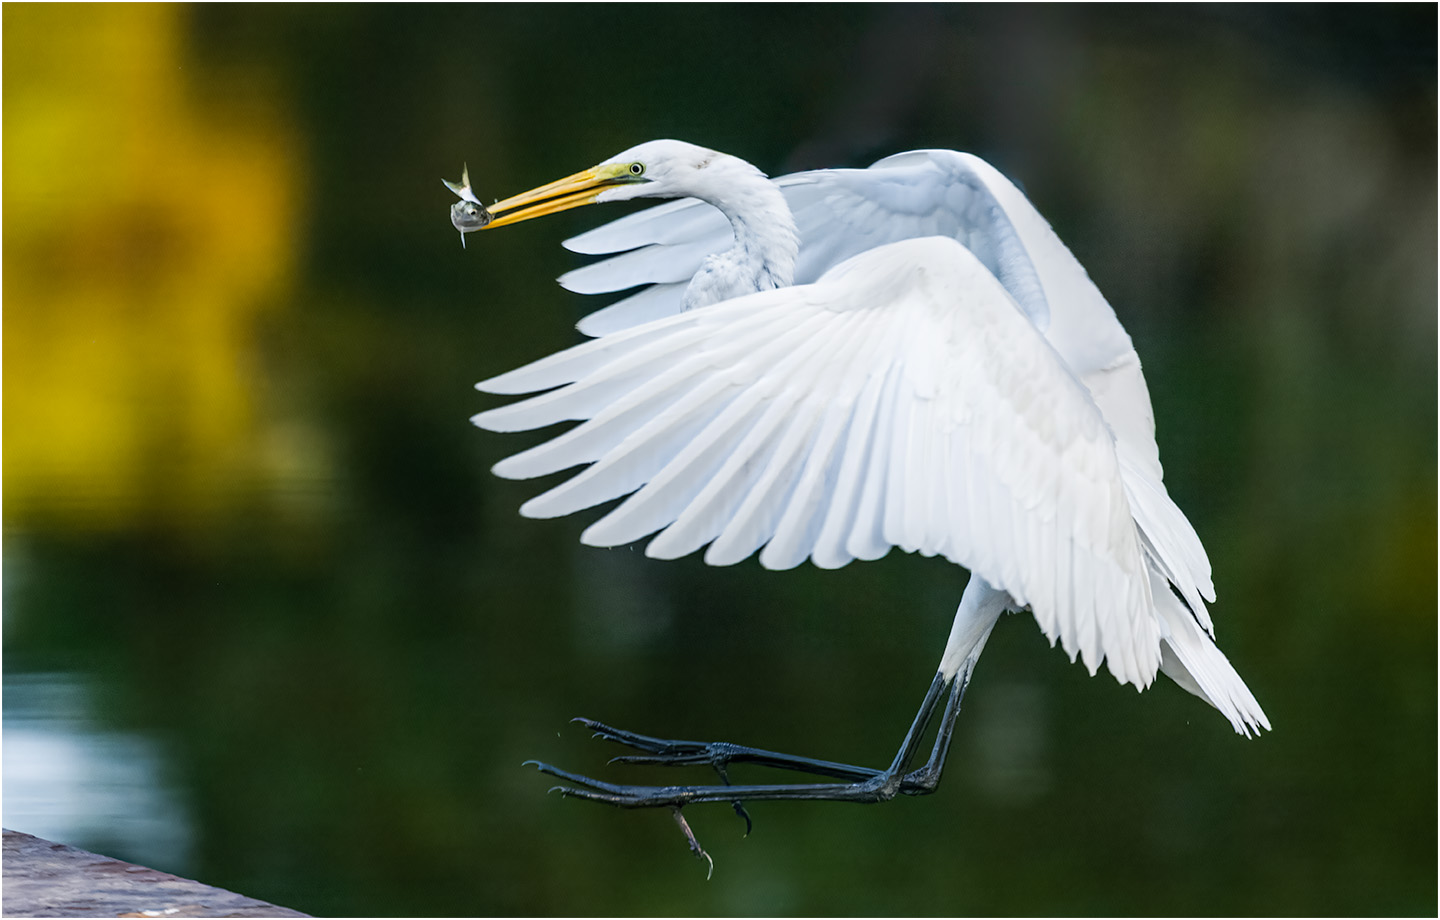 1st PrizeOpen Color In Class 3 By Leon Smith For Great Egret With Fish OCT-2023.jpg